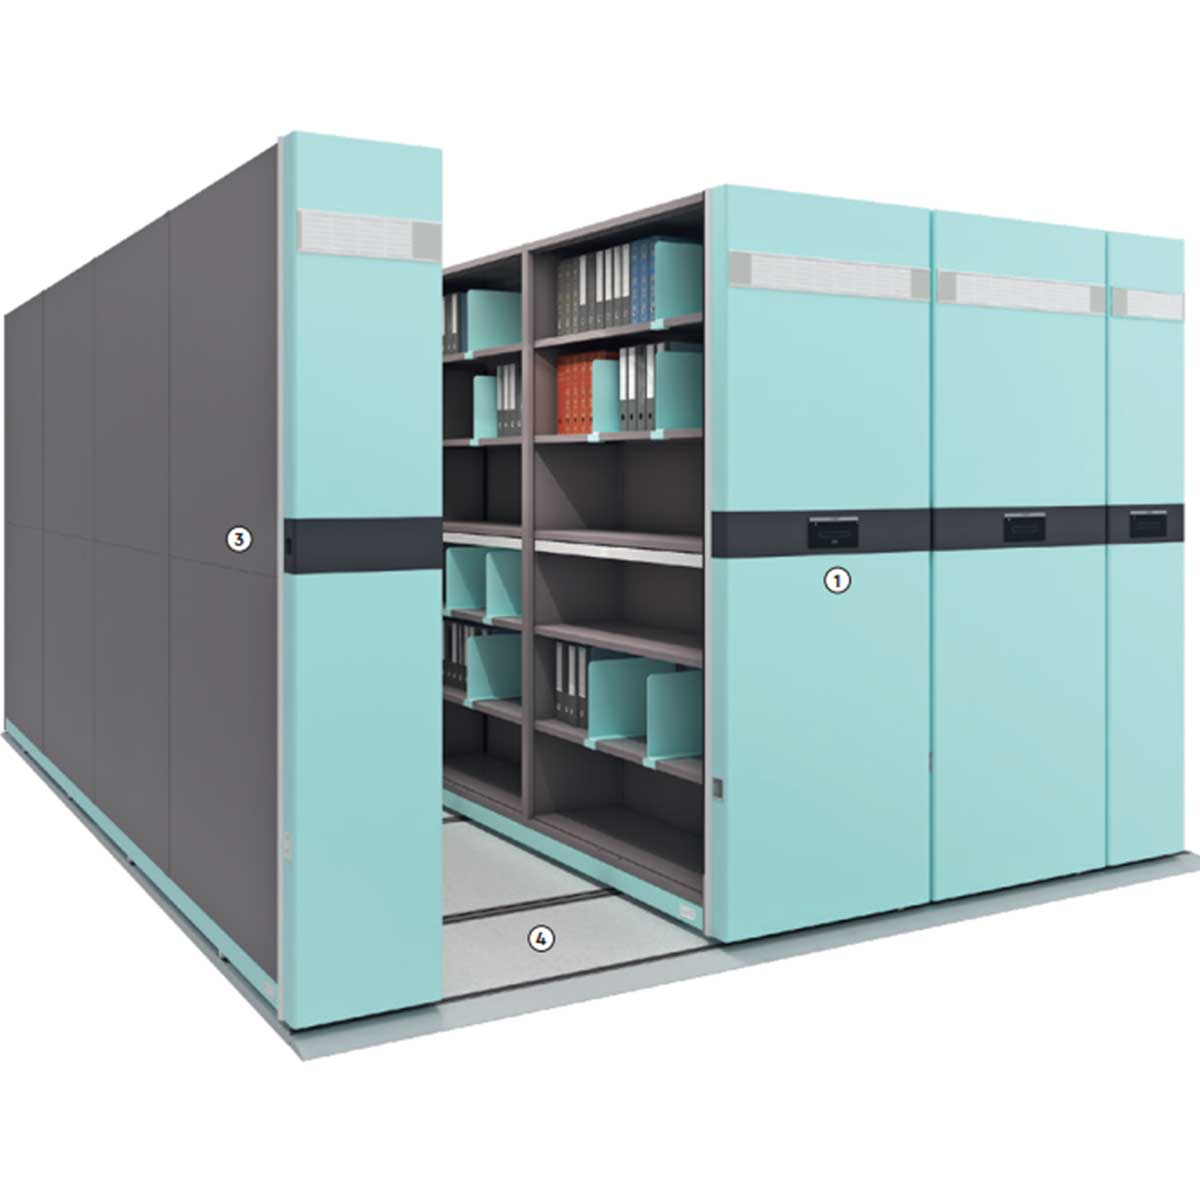 Mobile compactor storage Manufacturers, Suppliers in Dwarka Mor